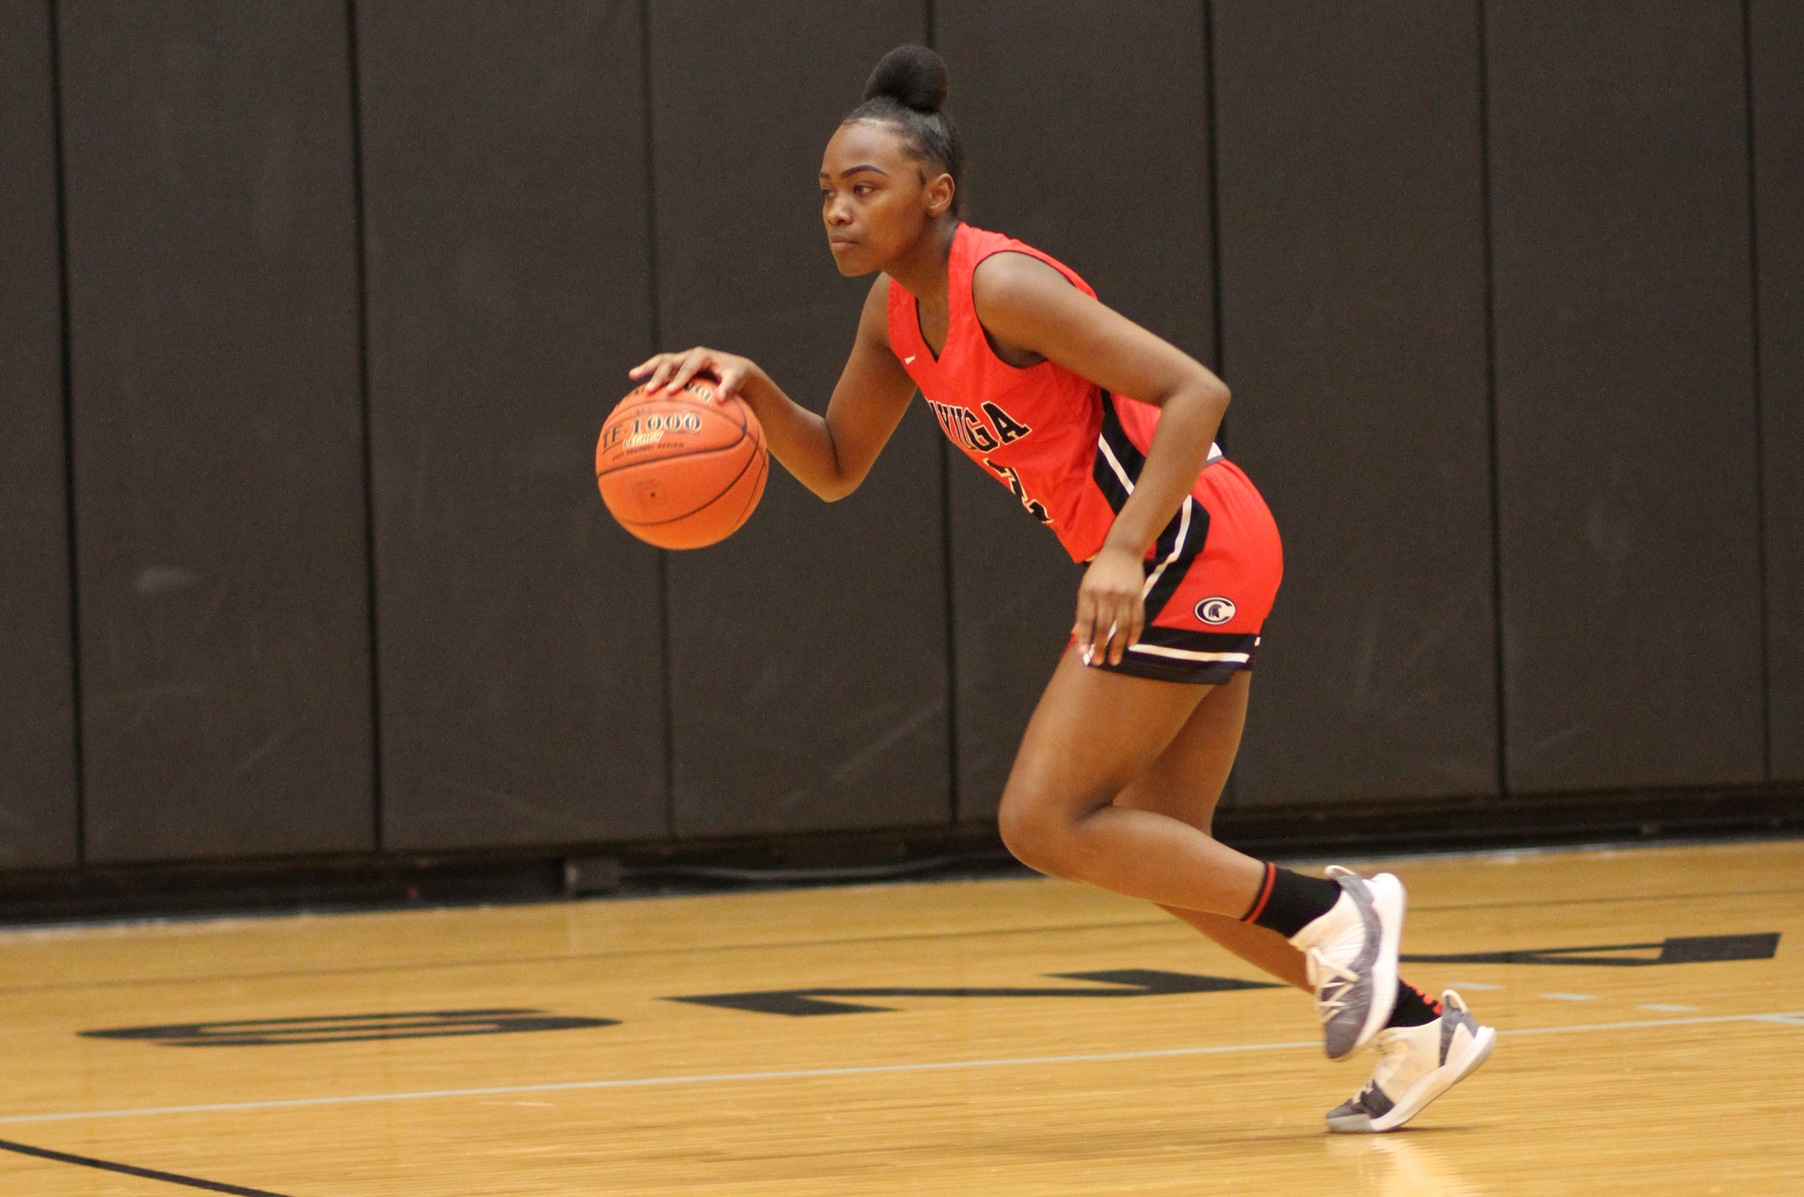 Allaysha Grady had nine points for the Spartans in their loss to Corning.